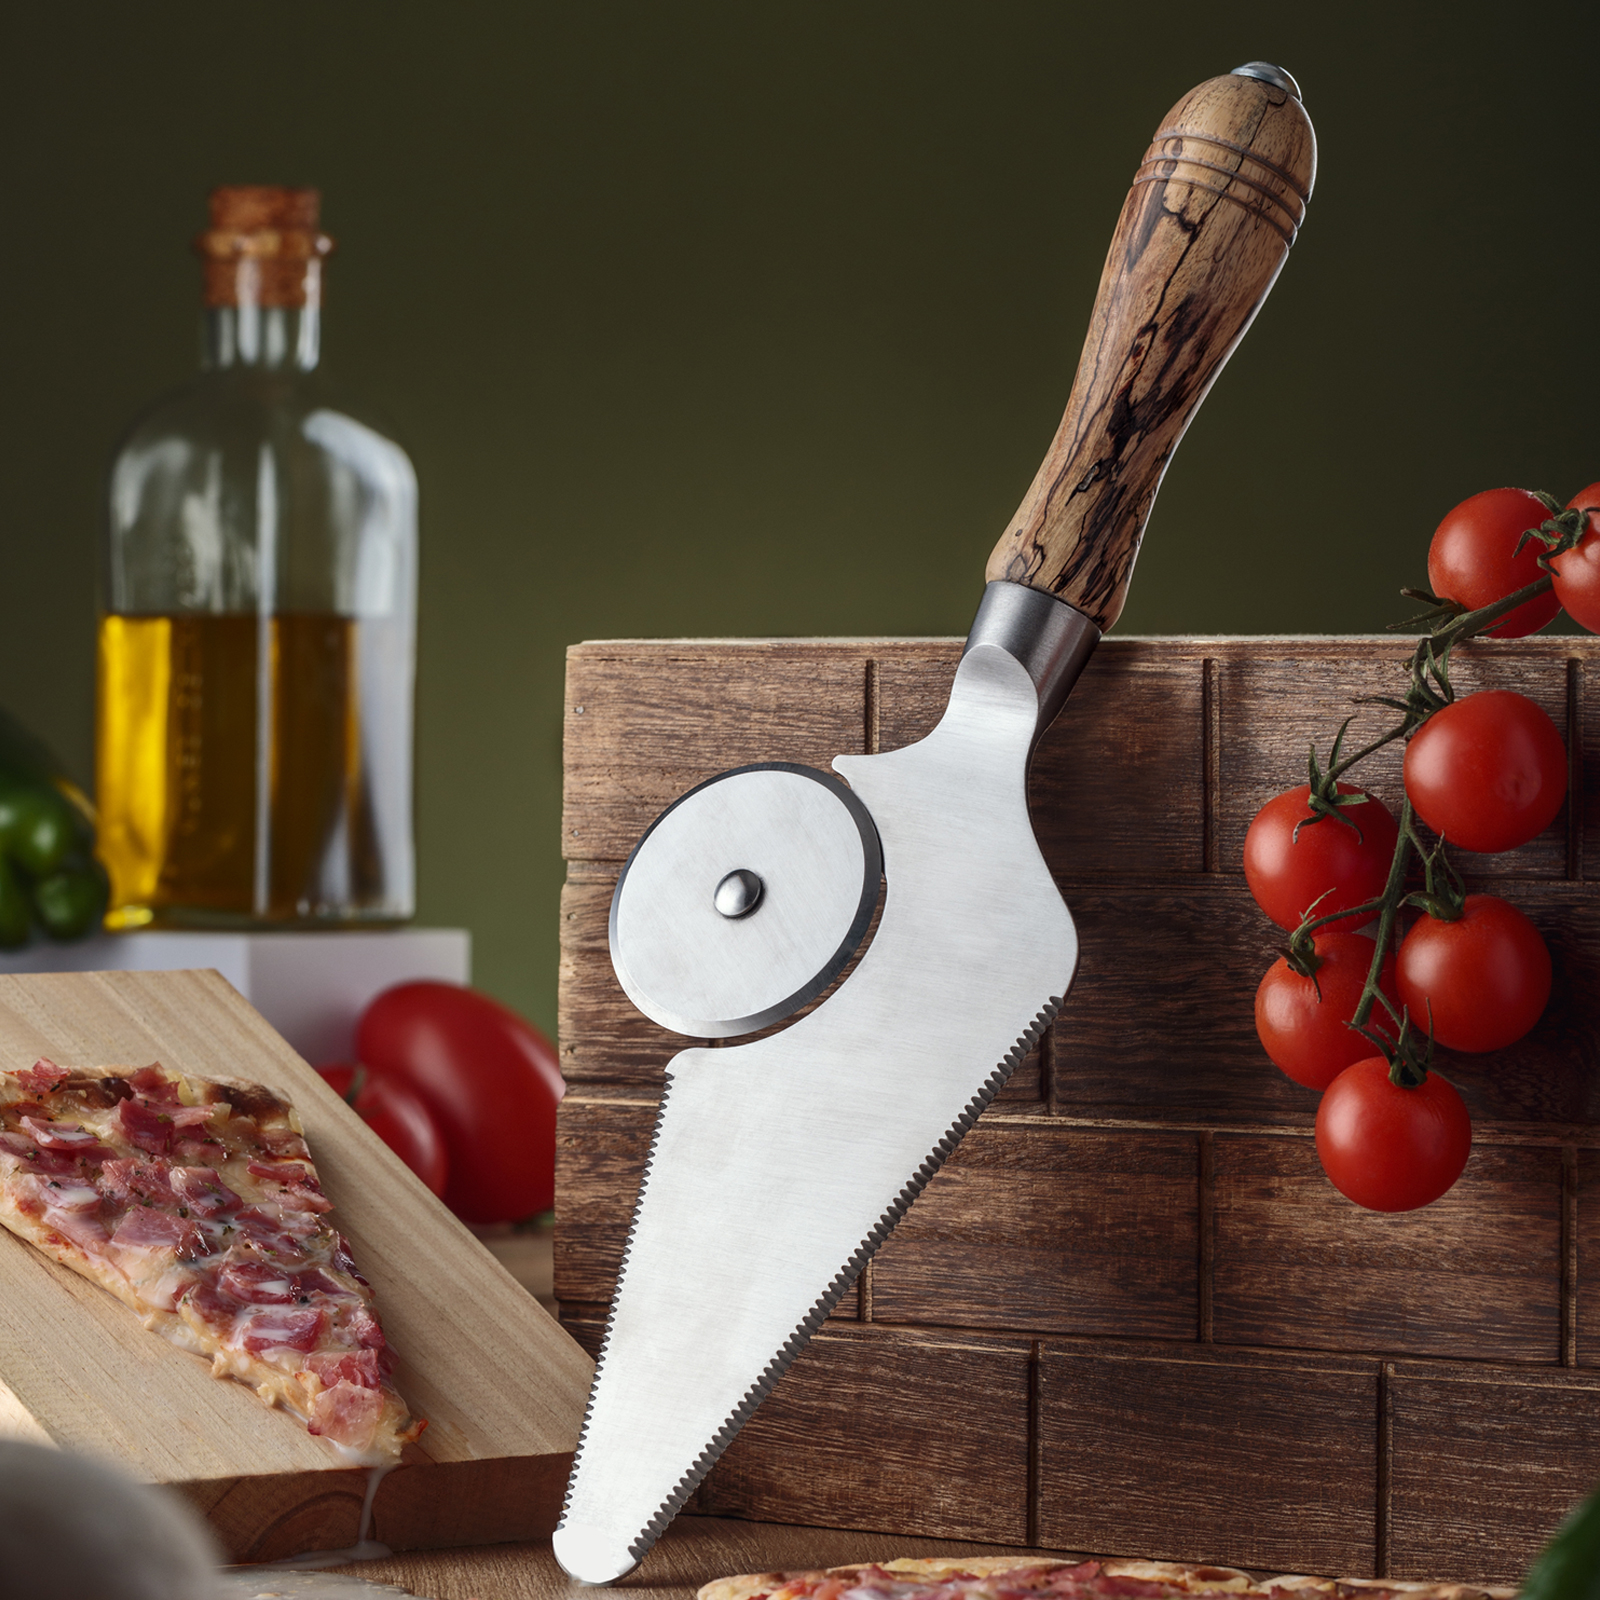 3 in 1 Pizza Cutter, Slicer and Server at Penn State Industries